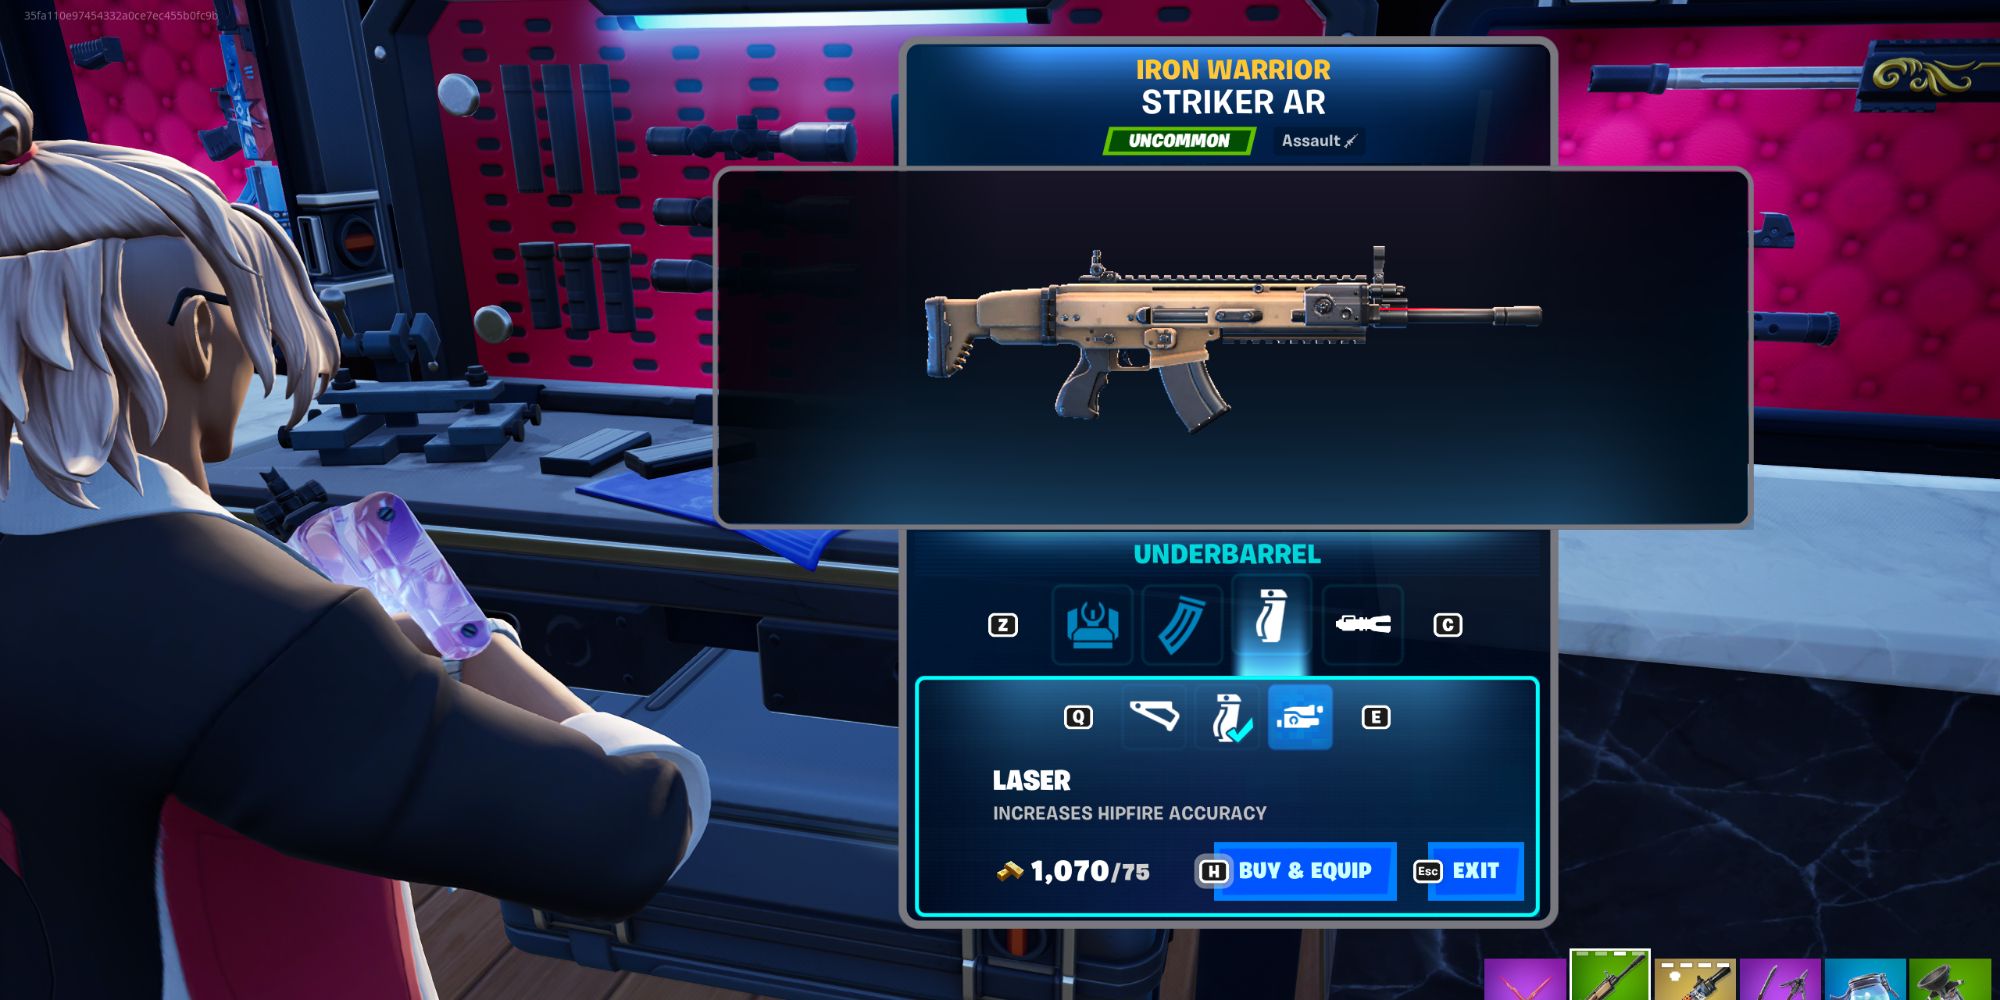 An image from Fortnite of the Laser Attachment, which increases hipfire accuracy.